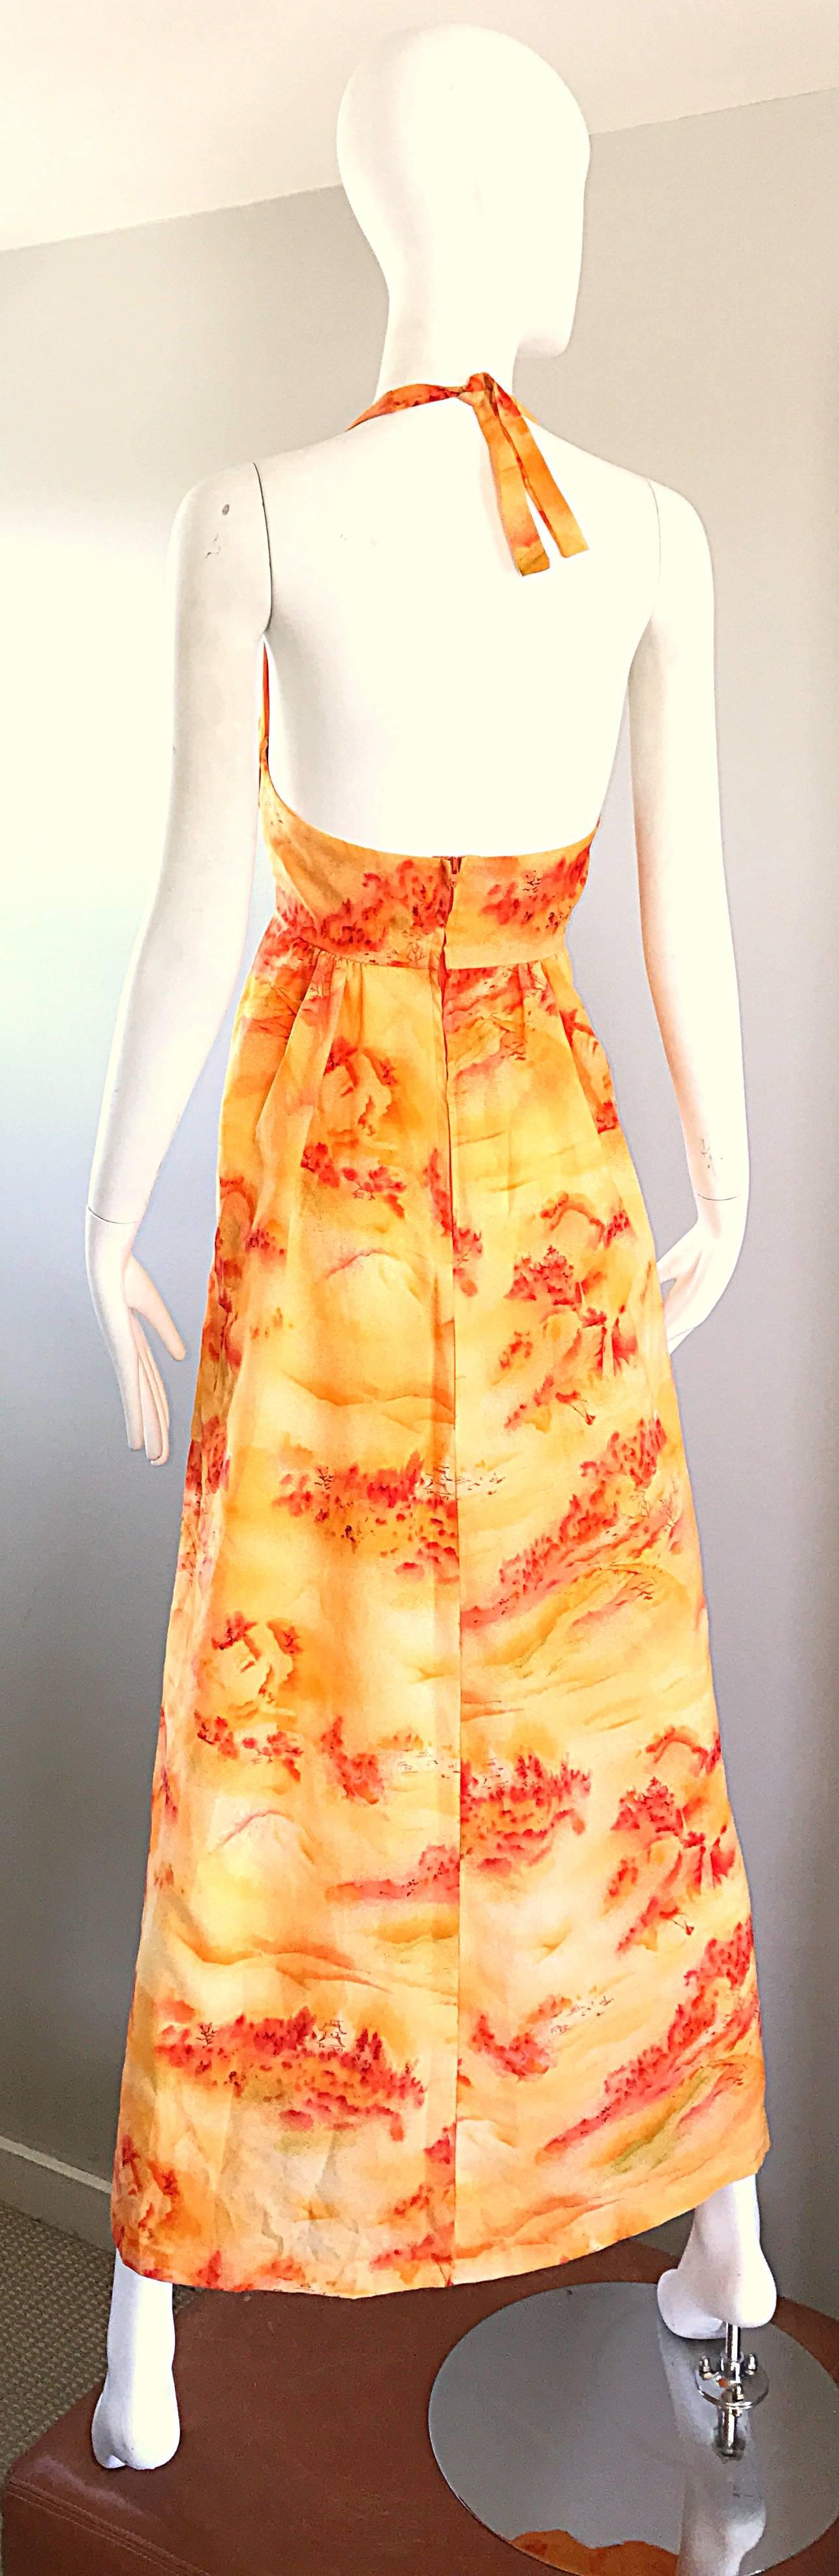 Women's Incredible 1970s Asian Themed Bright Orange Vintage 70s Novelty Maxi Dress  For Sale